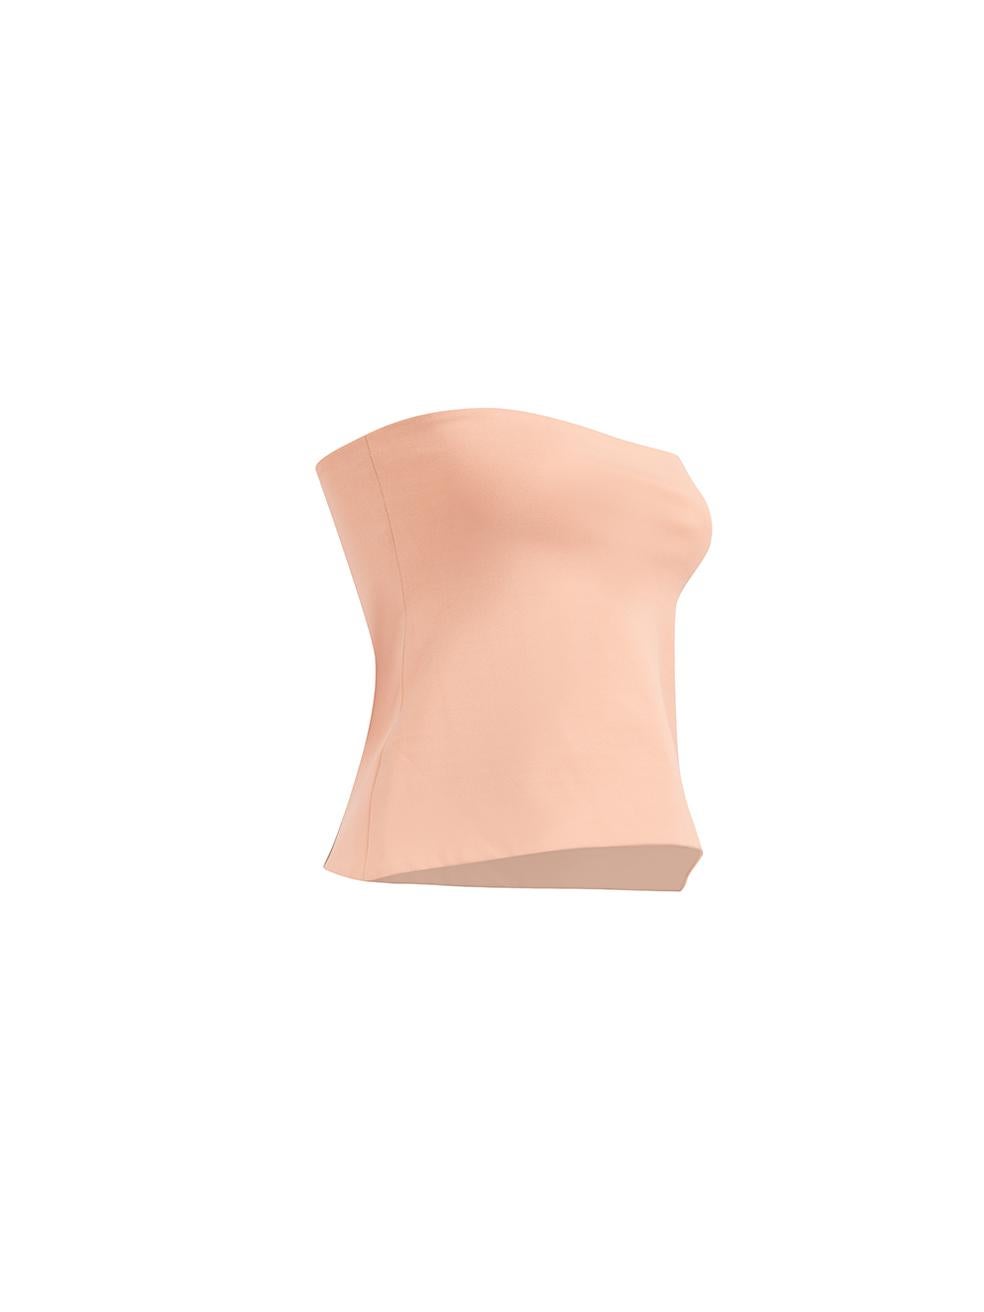 CONDITION is Never Worn. No visible wear to top is evident on this used Marni designer resale item.
 
 Details
  Pink
 White
 Viscose
 Bustier
 Form fitting
 Sleeveless
 Front clasp button fastening
 
 
 Made in Italy
 
 Composition
 61% Viscose